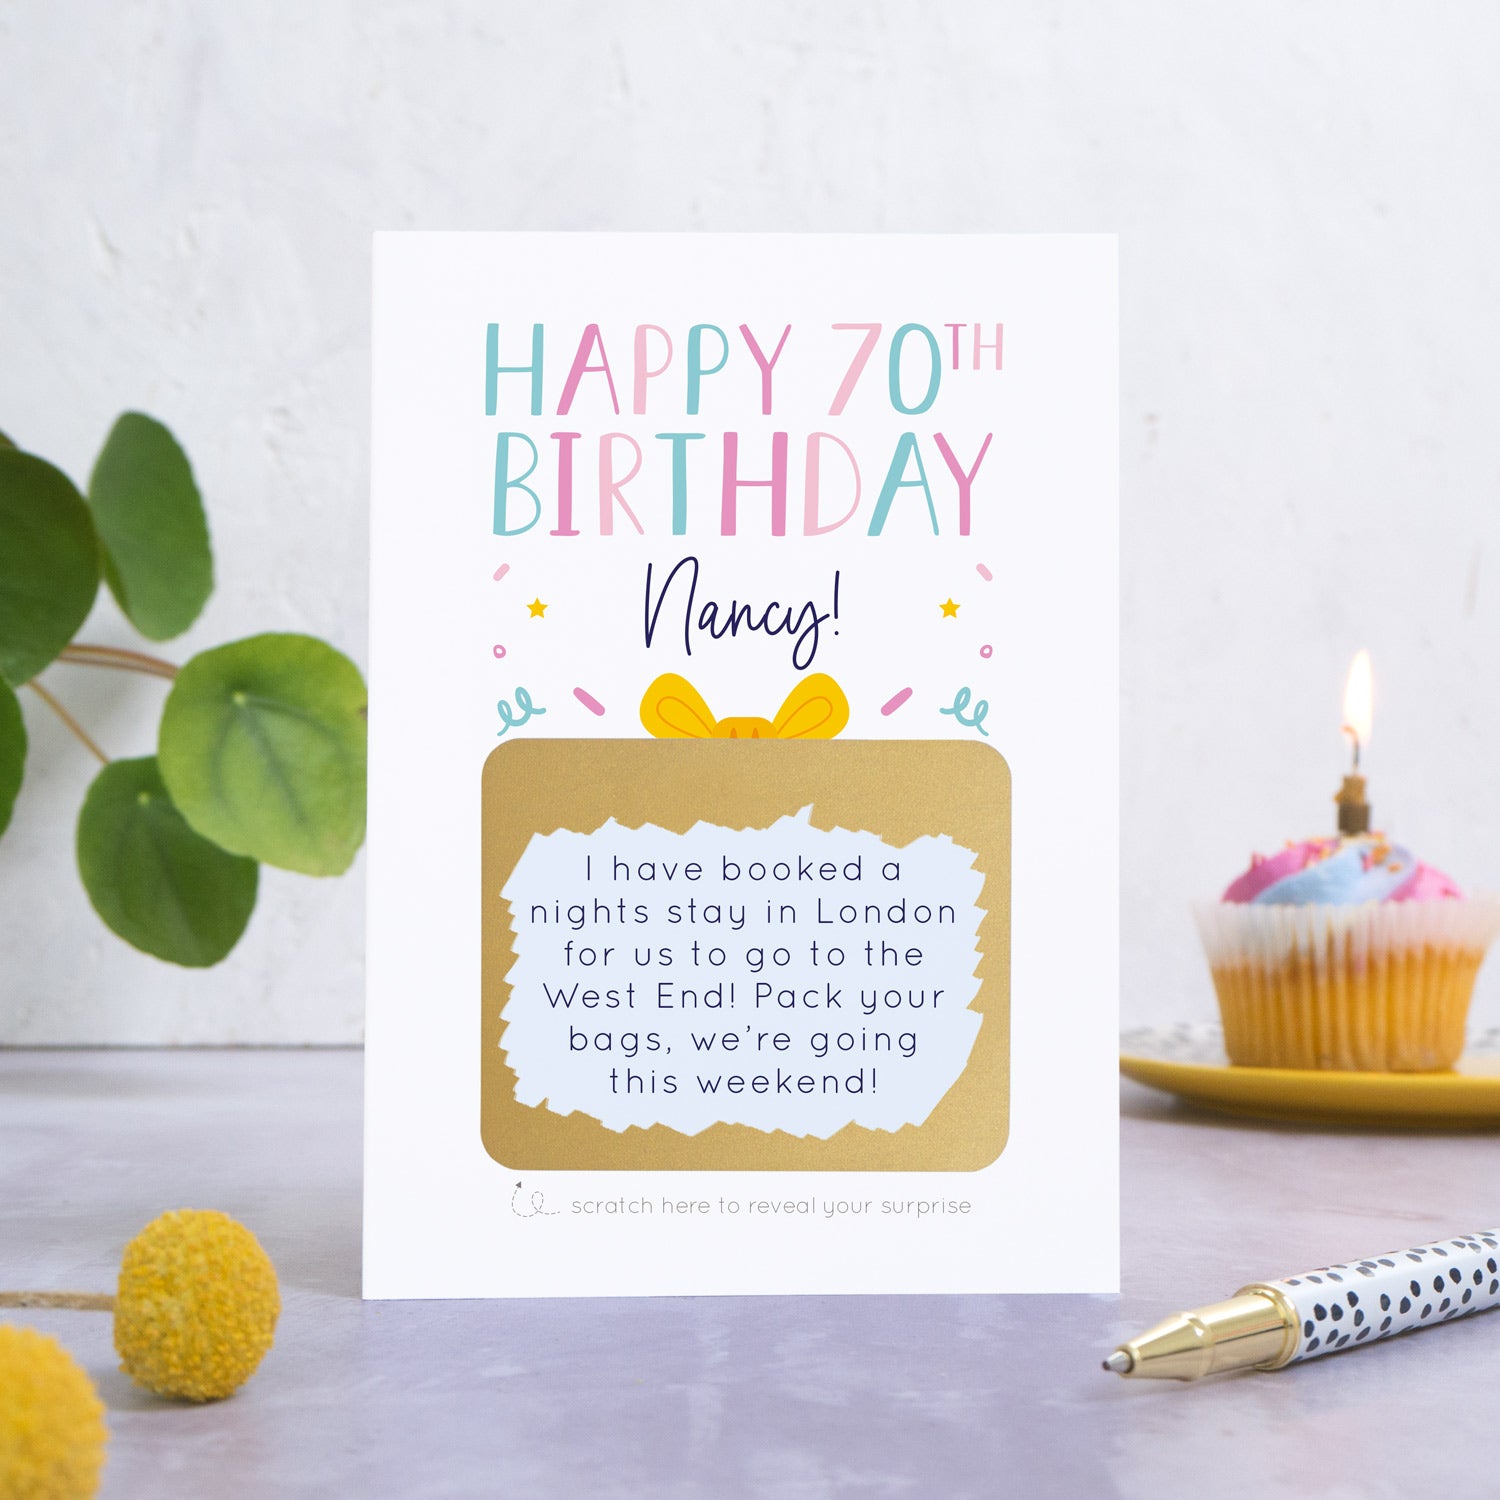 A personalised happy 70th birthday scratch card in pink that has been photographed on a white and grey background. There is foliage and yellow flowers on the left and a cupcake and a pen to the right. The card features the recipients name and a scratch panel that has been scratched off revealing a personalised message.